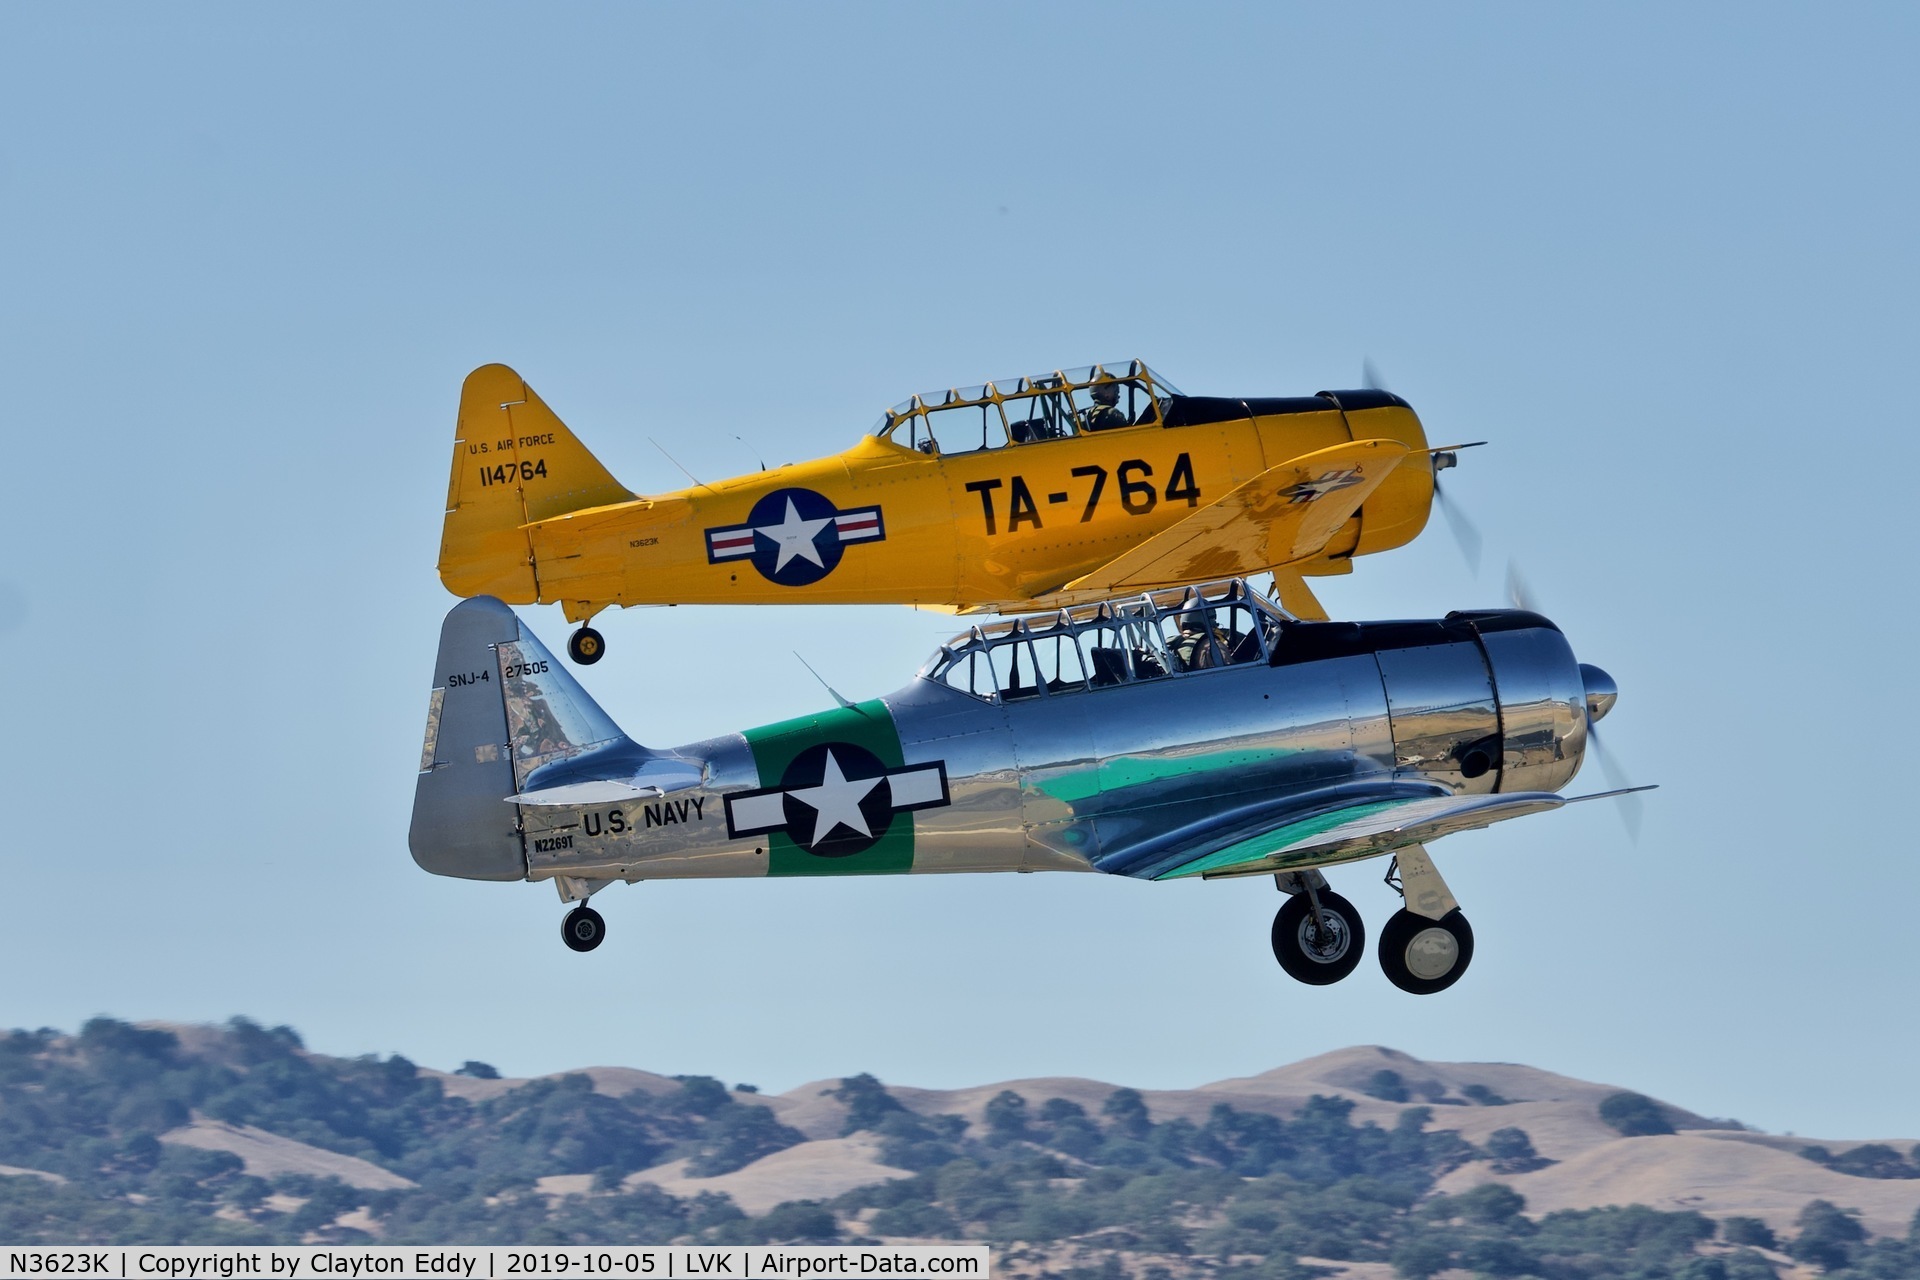 N3623K, North American T-6G Texan C/N 168-472, Livermore airport airshow 2019.